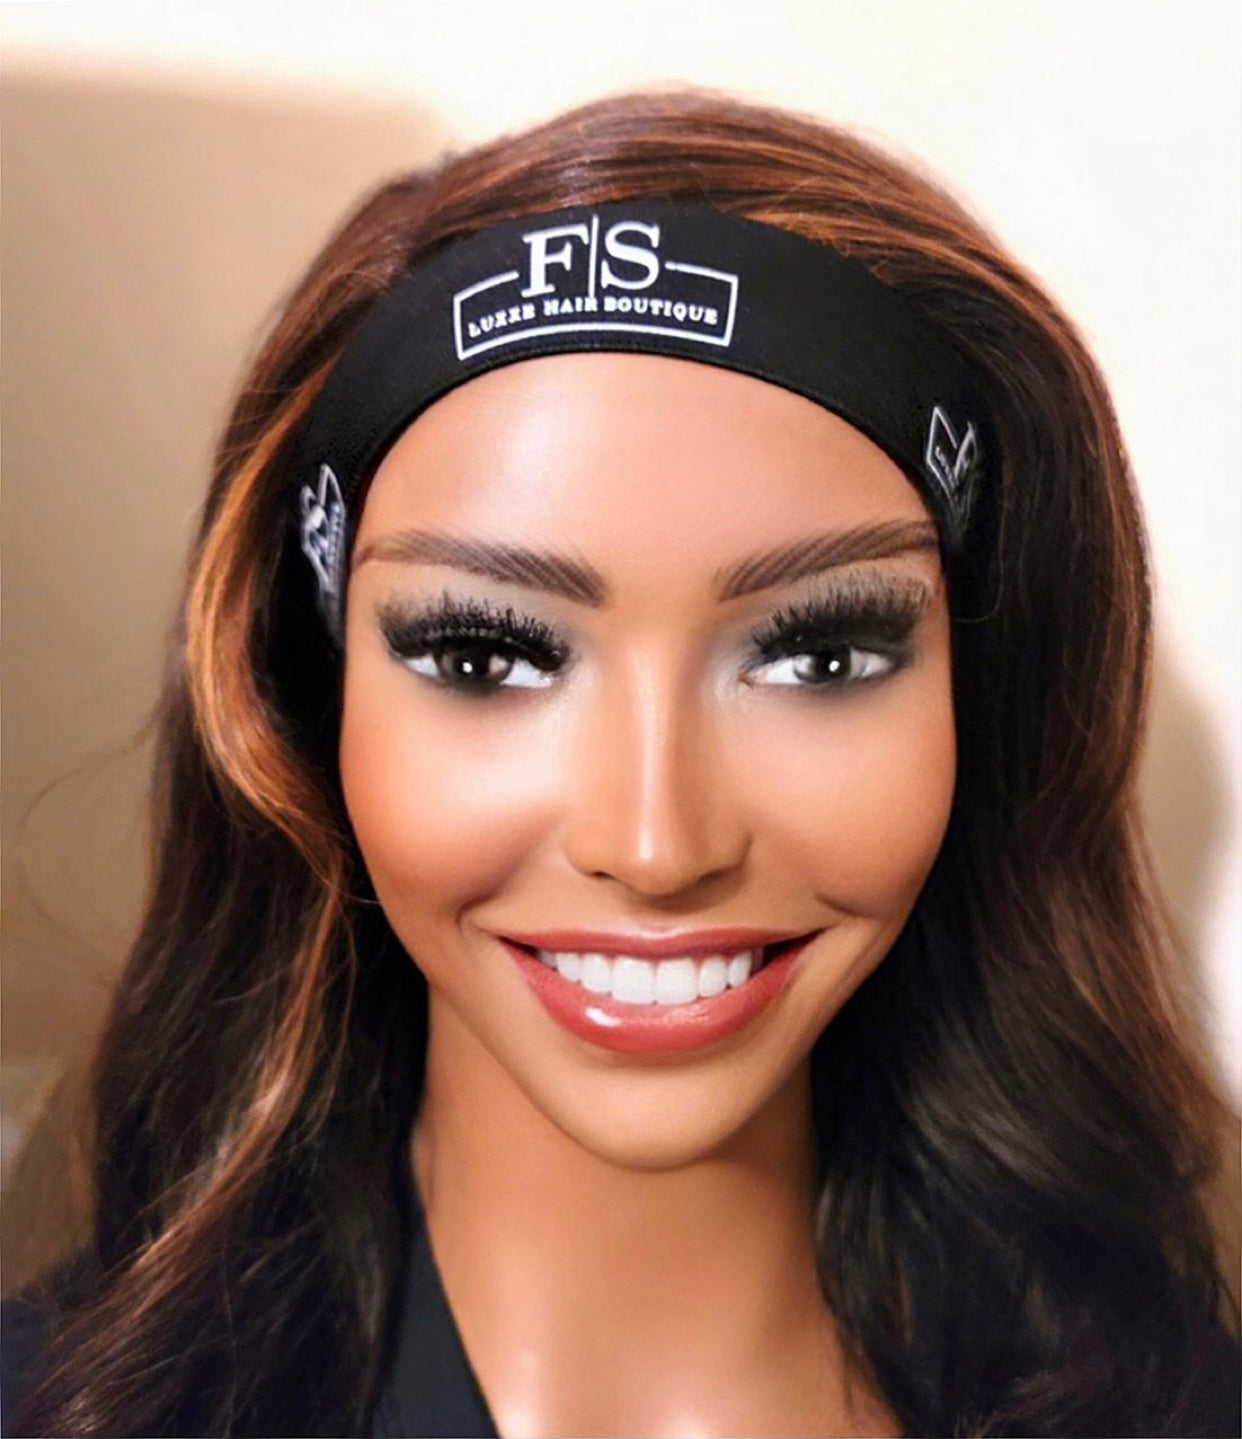 CC-COUTURE LUXE LACE WIG ELASTIC MELTING BAND